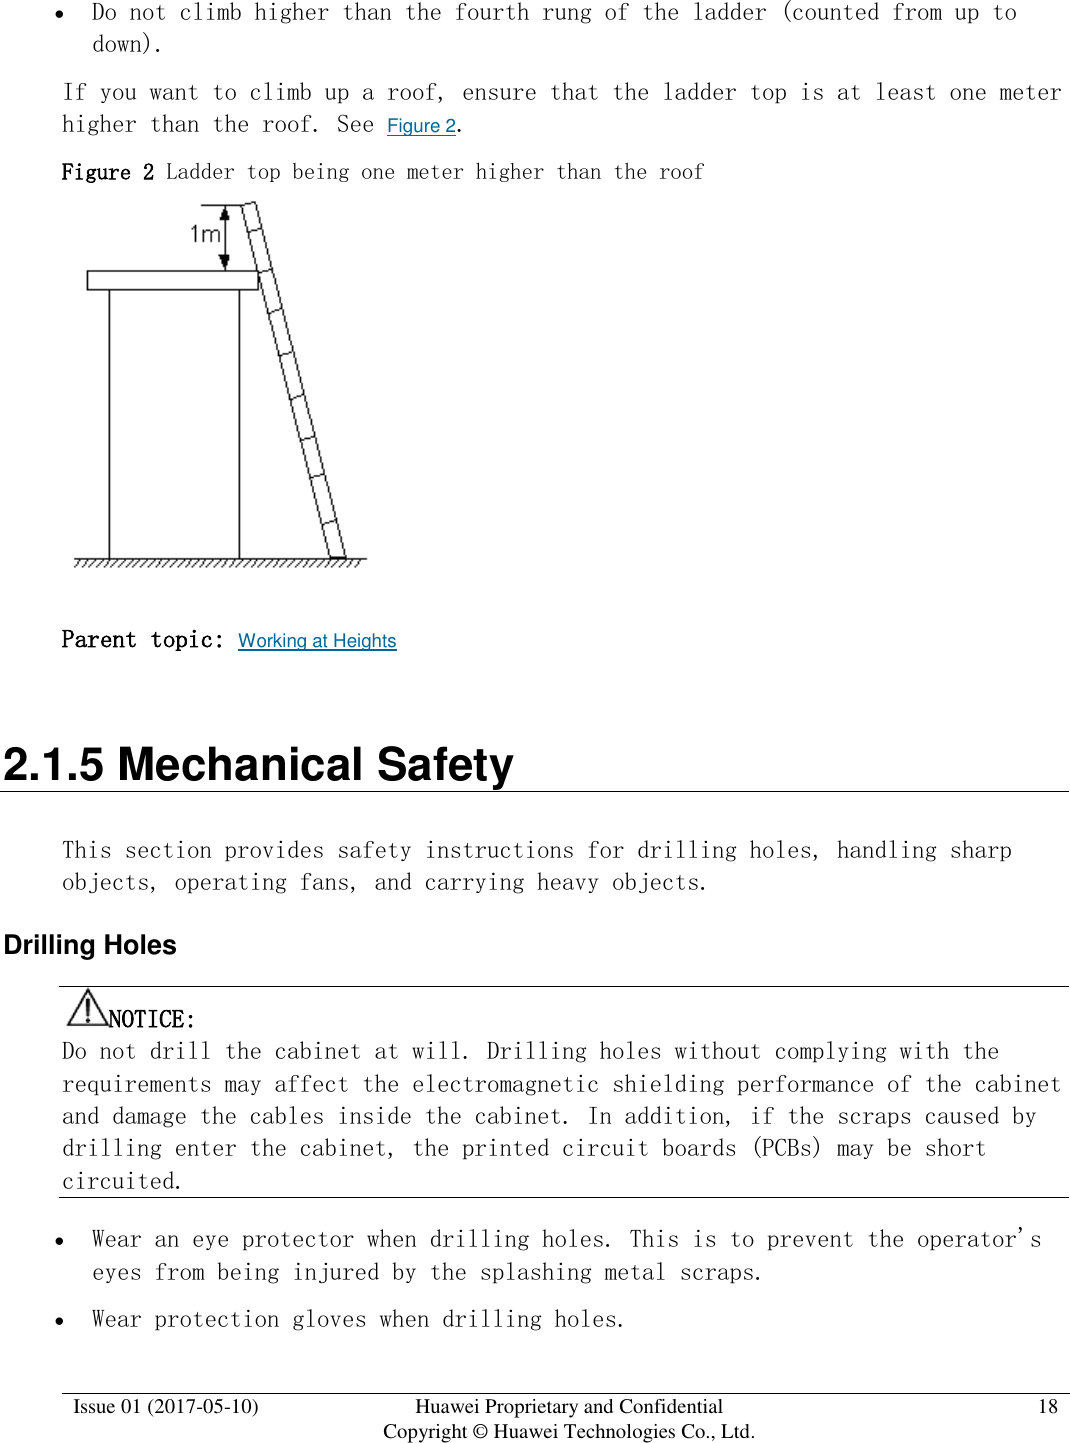  Issue 01 (2017-05-10) Huawei Proprietary and Confidential      Copyright © Huawei Technologies Co., Ltd. 18   Do not climb higher than the fourth rung of the ladder (counted from up to down).  If you want to climb up a roof, ensure that the ladder top is at least one meter higher than the roof. See Figure 2. Figure 2 Ladder top being one meter higher than the roof   Parent topic: Working at Heights 2.1.5 Mechanical Safety This section provides safety instructions for drilling holes, handling sharp objects, operating fans, and carrying heavy objects. Drilling Holes NOTICE:  Do not drill the cabinet at will. Drilling holes without complying with the requirements may affect the electromagnetic shielding performance of the cabinet and damage the cables inside the cabinet. In addition, if the scraps caused by drilling enter the cabinet, the printed circuit boards (PCBs) may be short circuited.   Wear an eye protector when drilling holes. This is to prevent the operator&apos;s eyes from being injured by the splashing metal scraps.   Wear protection gloves when drilling holes. 